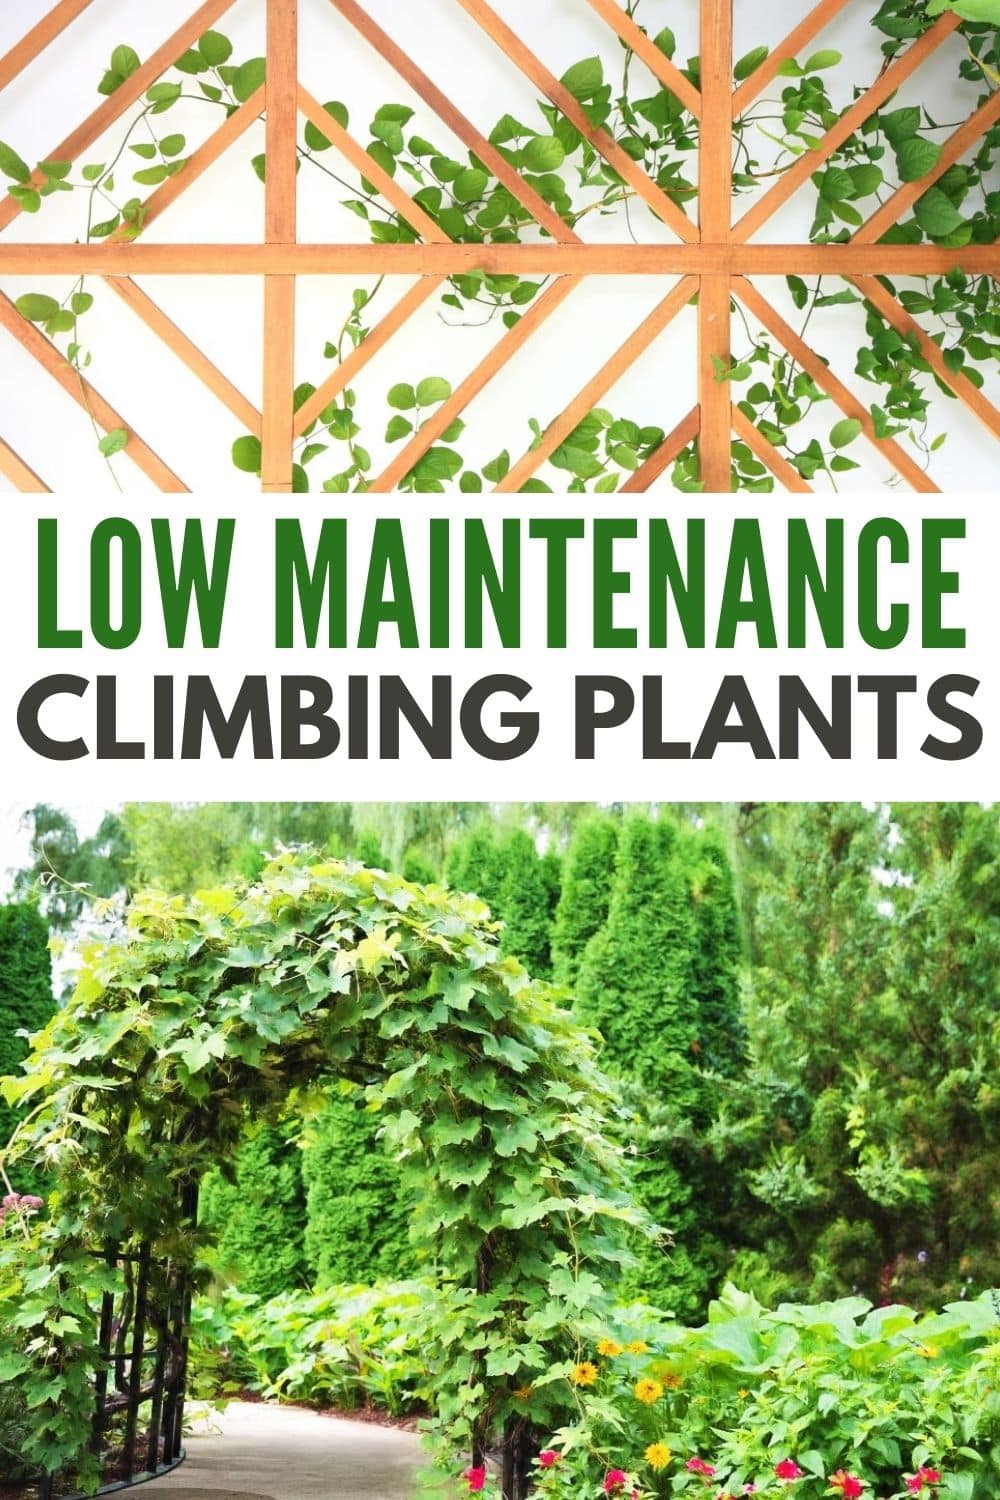 Low maintenance evergreen climbing plants are a great way to bring beauty to outdoor spaces without the hassle of regular upkeep. #lowmaintenance #evergreenclimbingplants #climbingplants #evergreenclimbers #gardening via @wondermomwannab